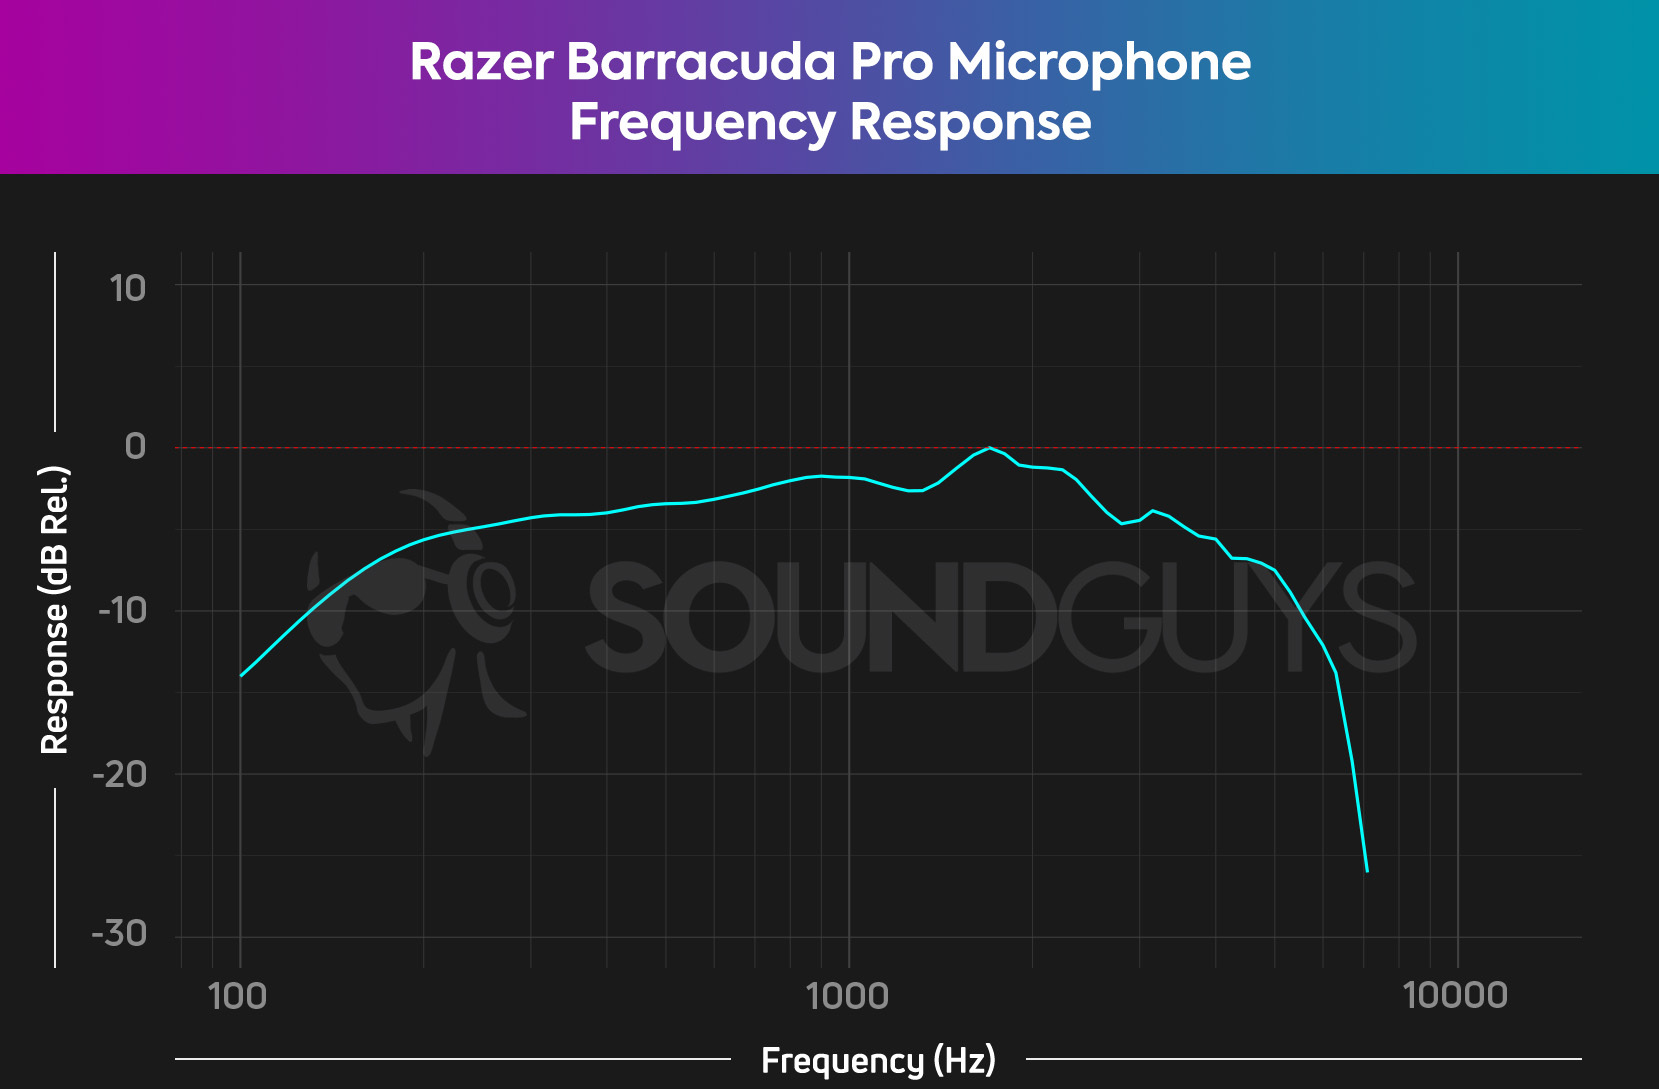 The Razer Barracuda Pro microphone frequency response chart, showing a bell curve that mostly covers the range where the human voice sits.